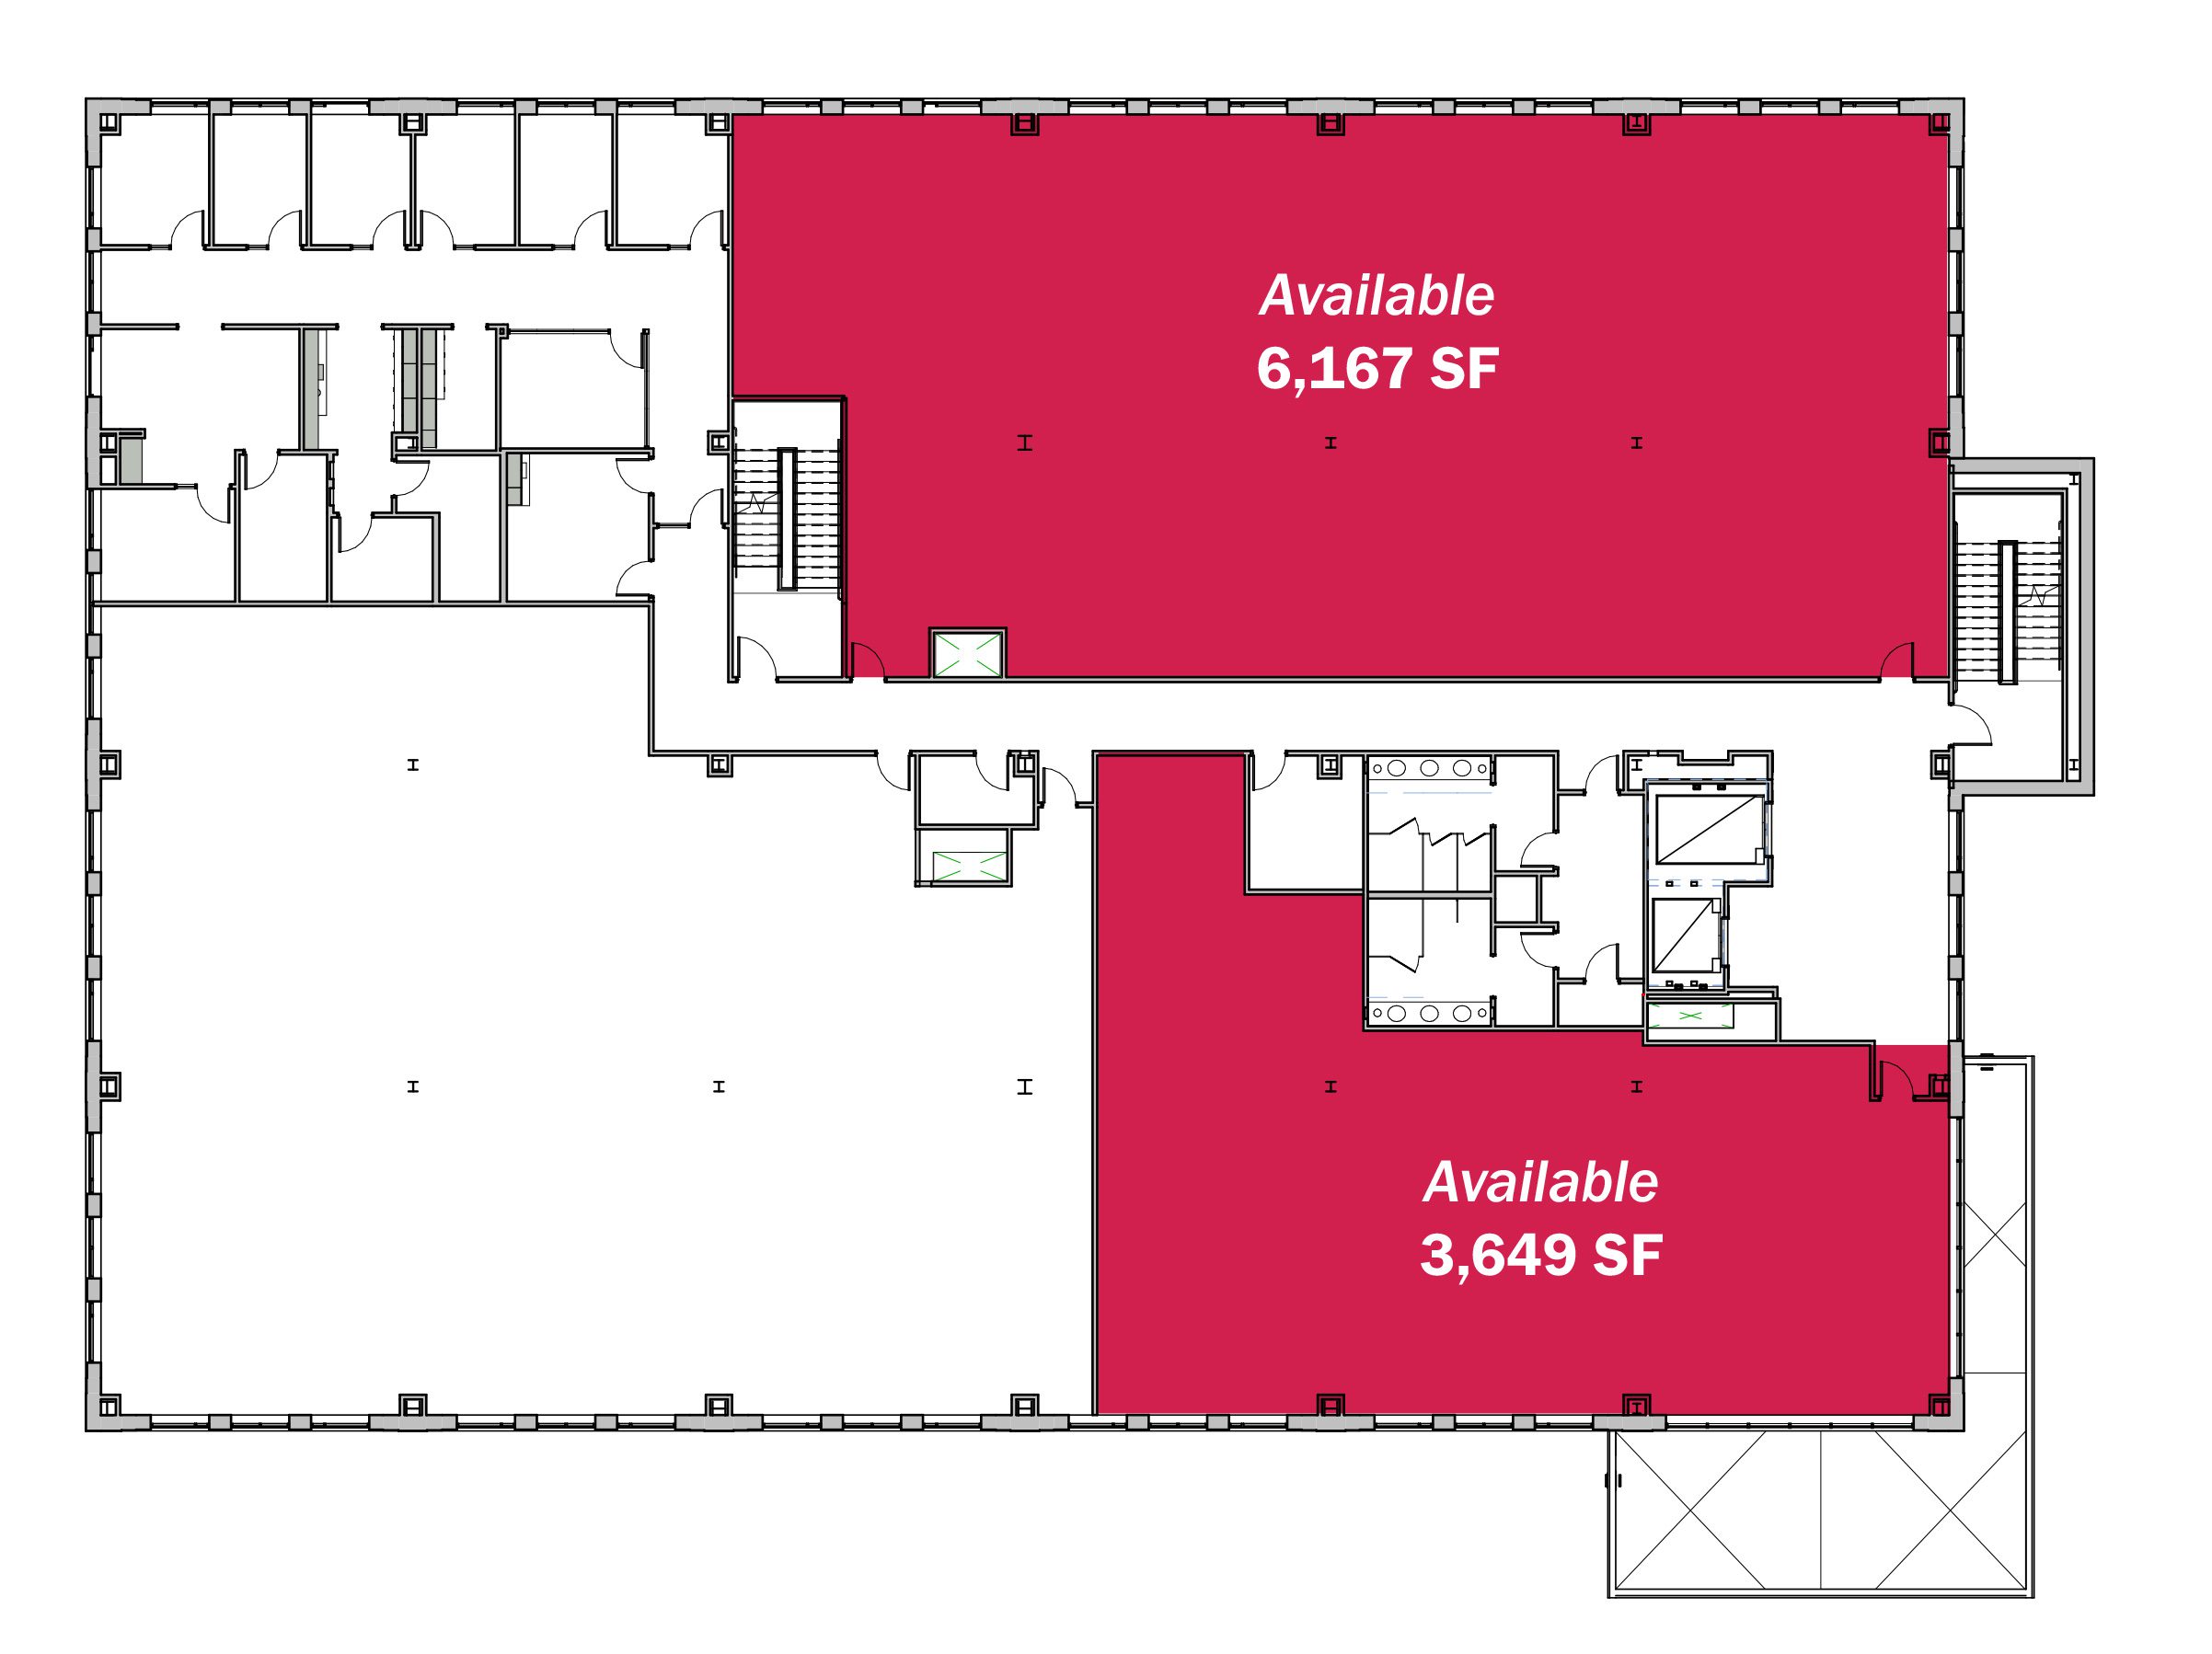 Floorplan with Red Shading